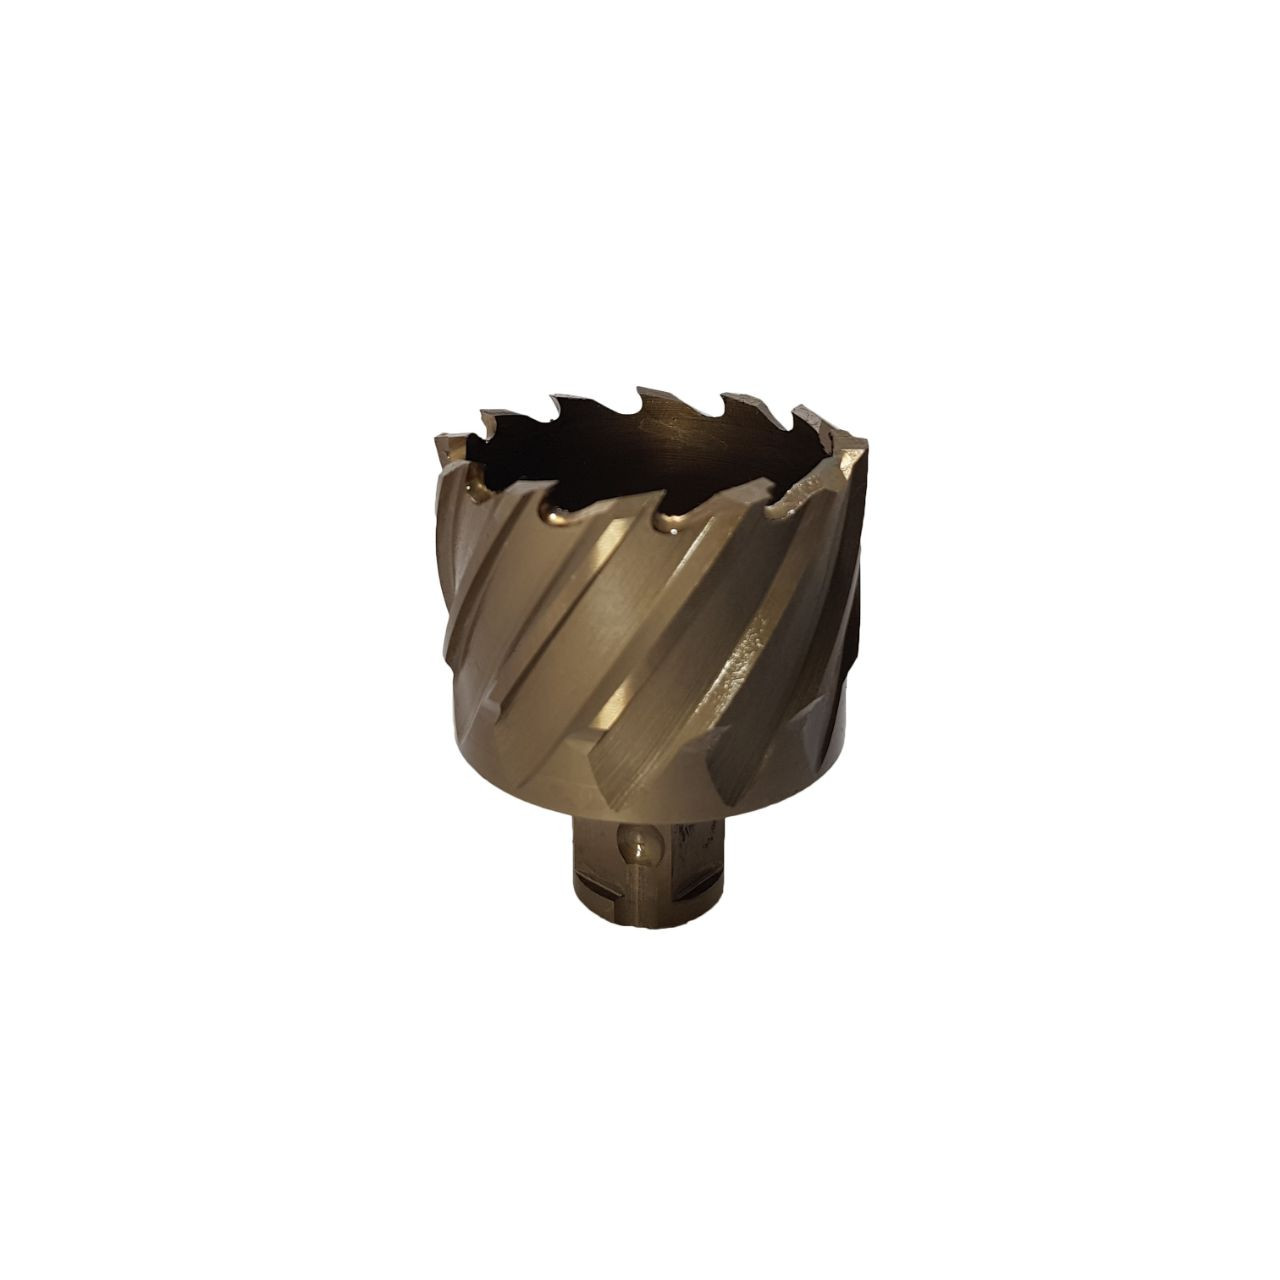 49 X 30 HSS-Co Excision Core Drill